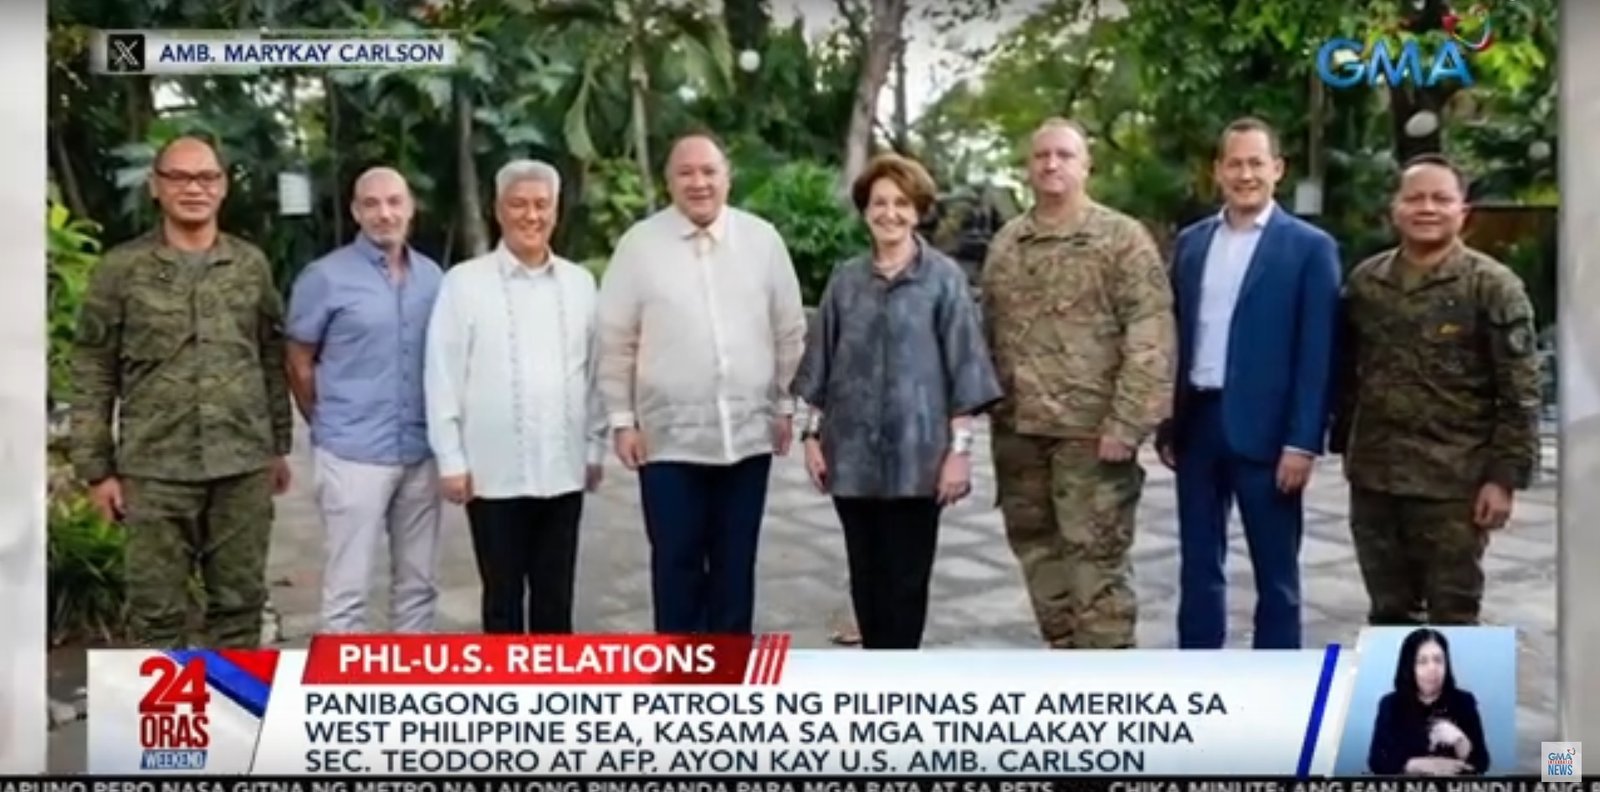 US envoy discussed new West PH Sea joint patrol with DND AFP